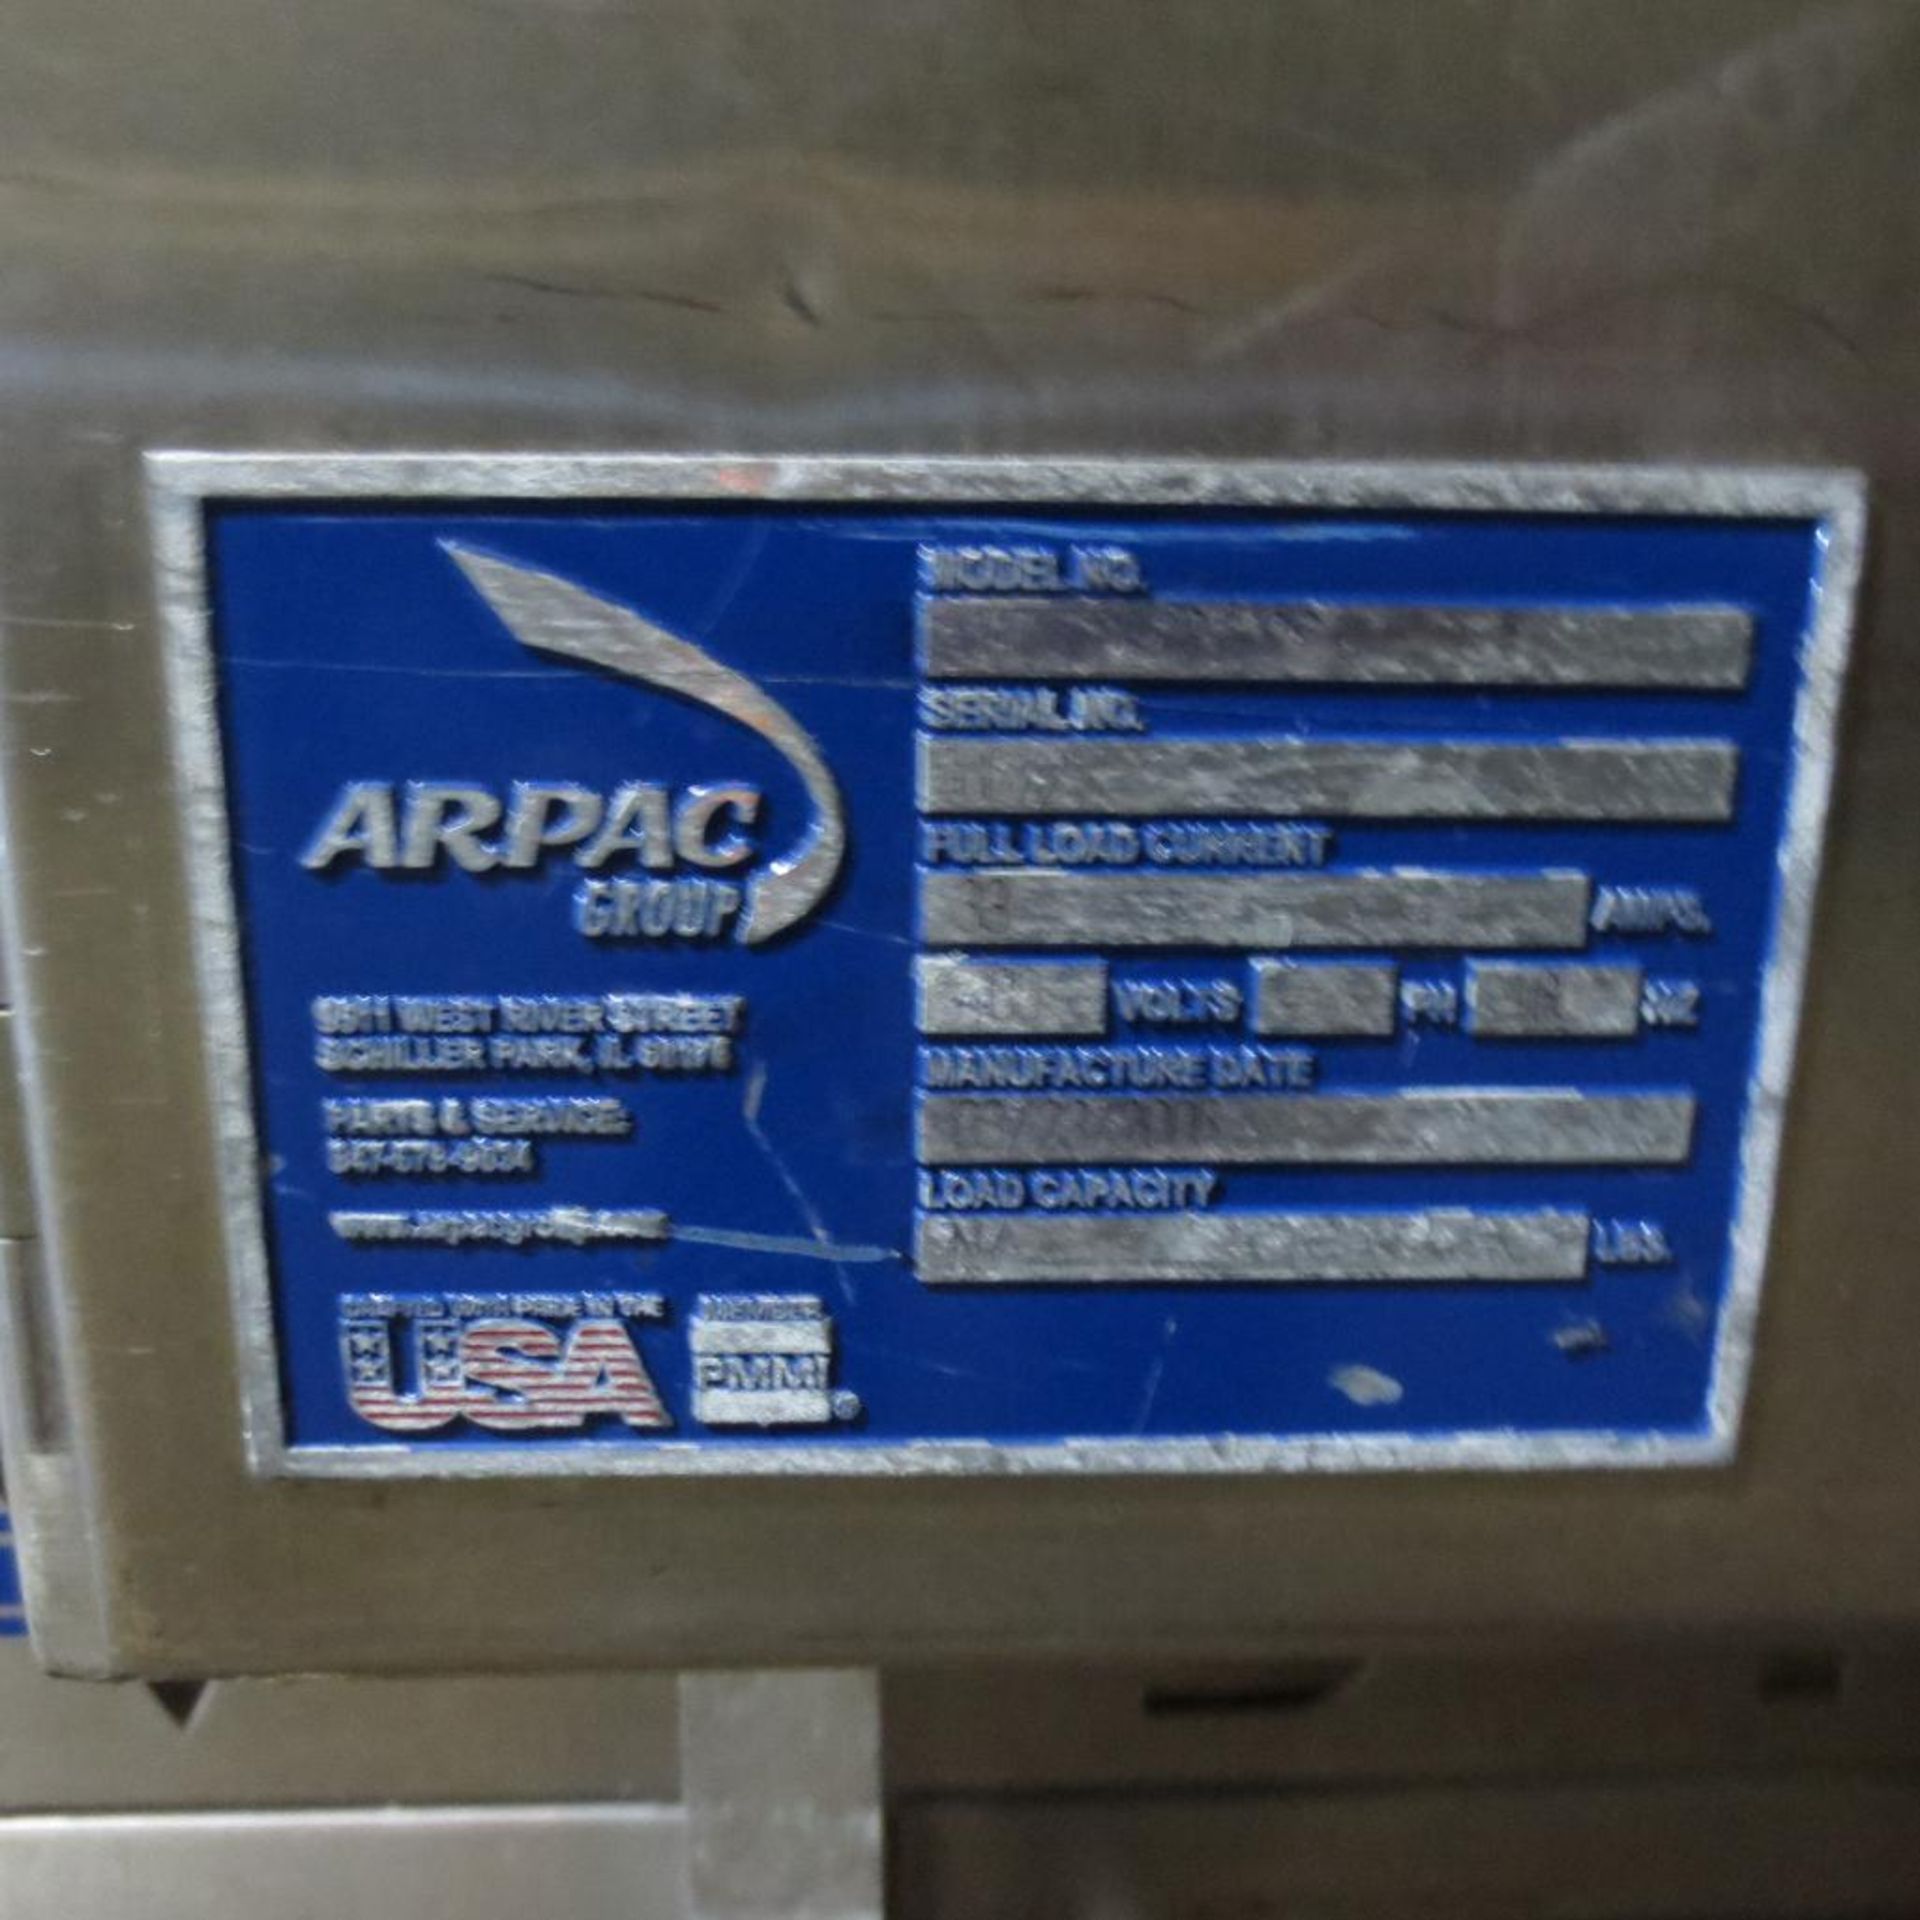 Arpac Model VT122272-SS Electric Shrink Tunnel, Year 2005, 24" Wide Belt Cap., S/N 6672 - Image 3 of 4